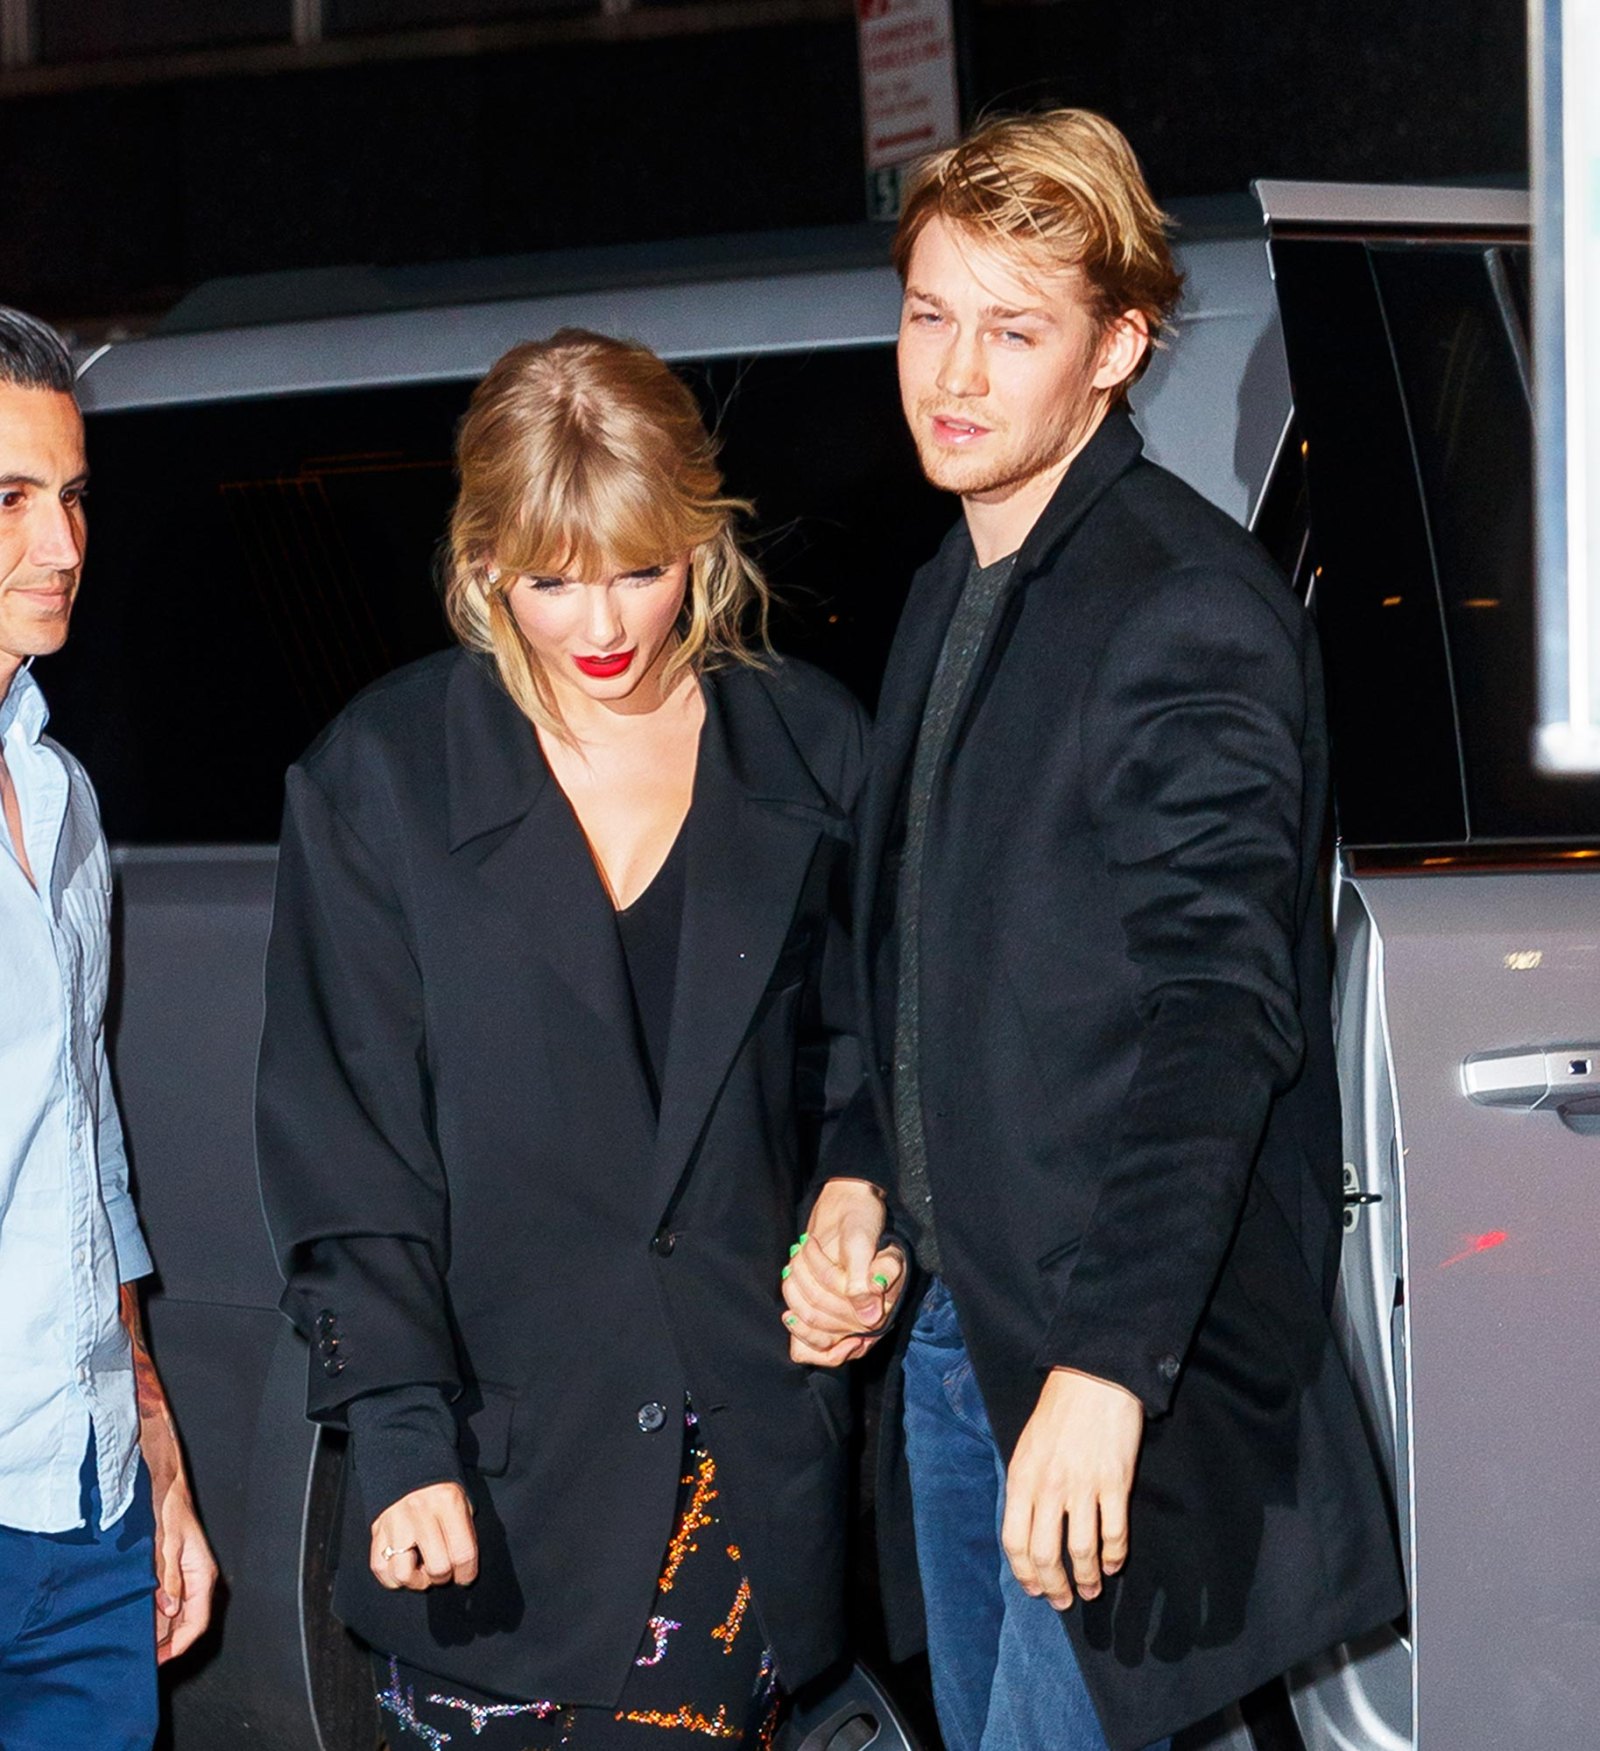 Taylor Swift Implies Feeling ‘Lonely’ During the Pandemic Despite Quarantining With Joe Alwyn